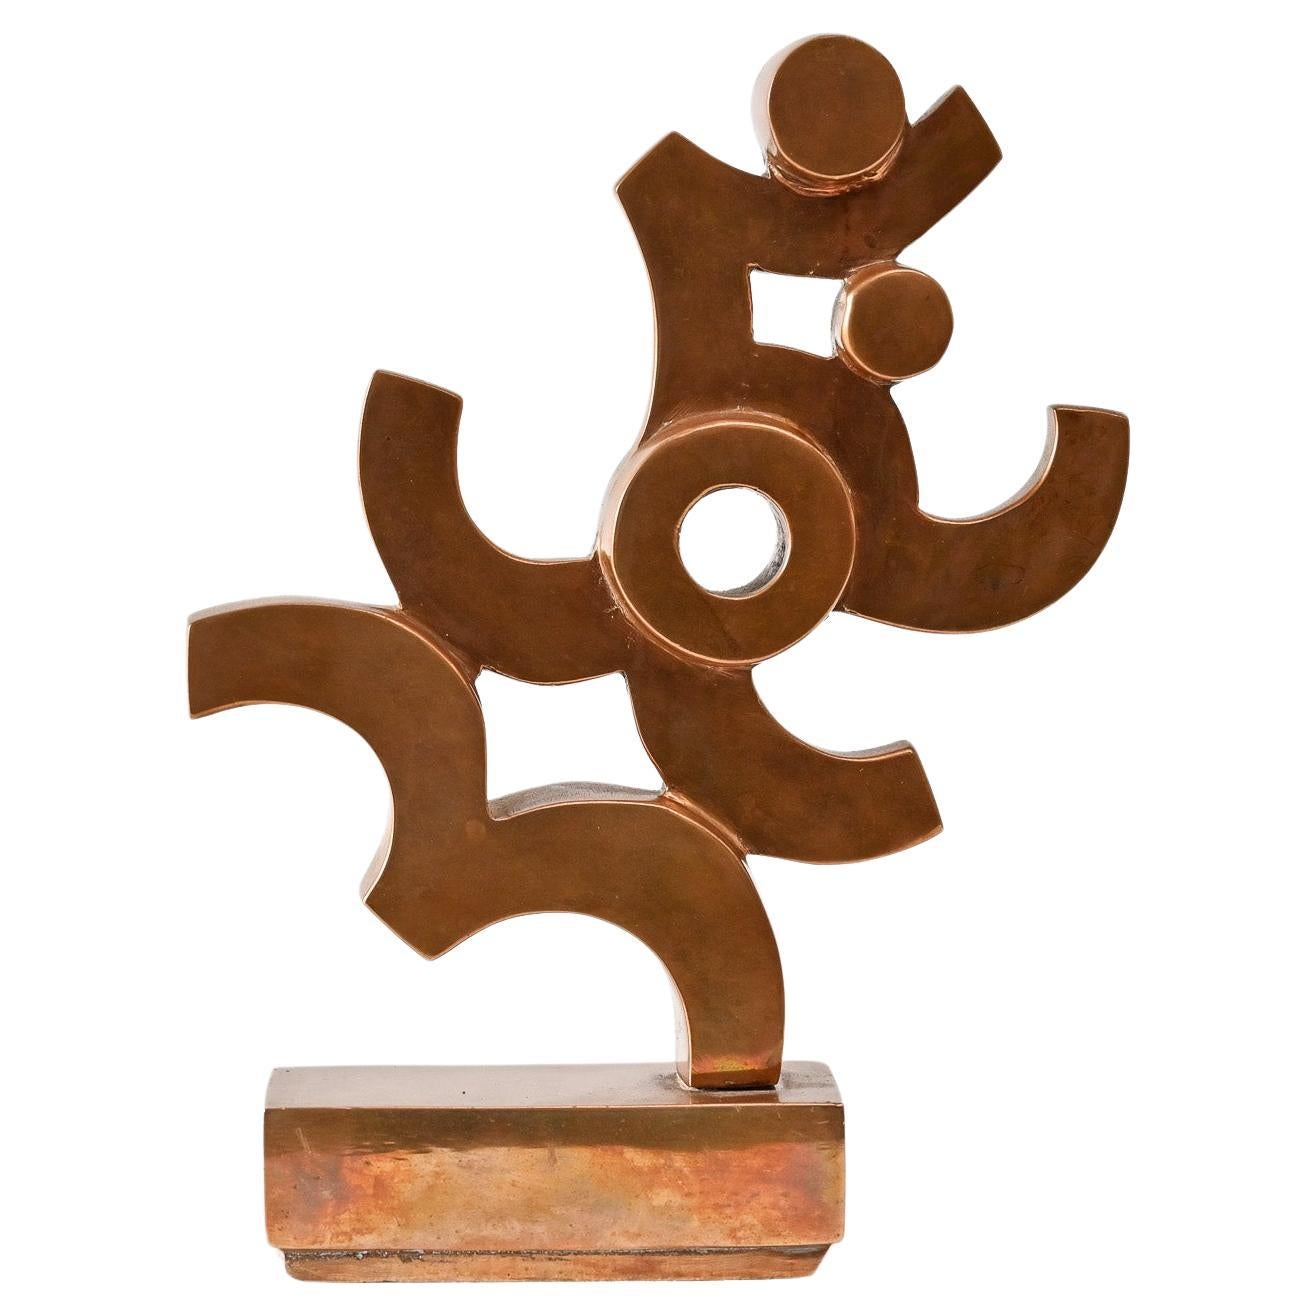 cast bronze abstract form 1 by Umberto Mastroianni